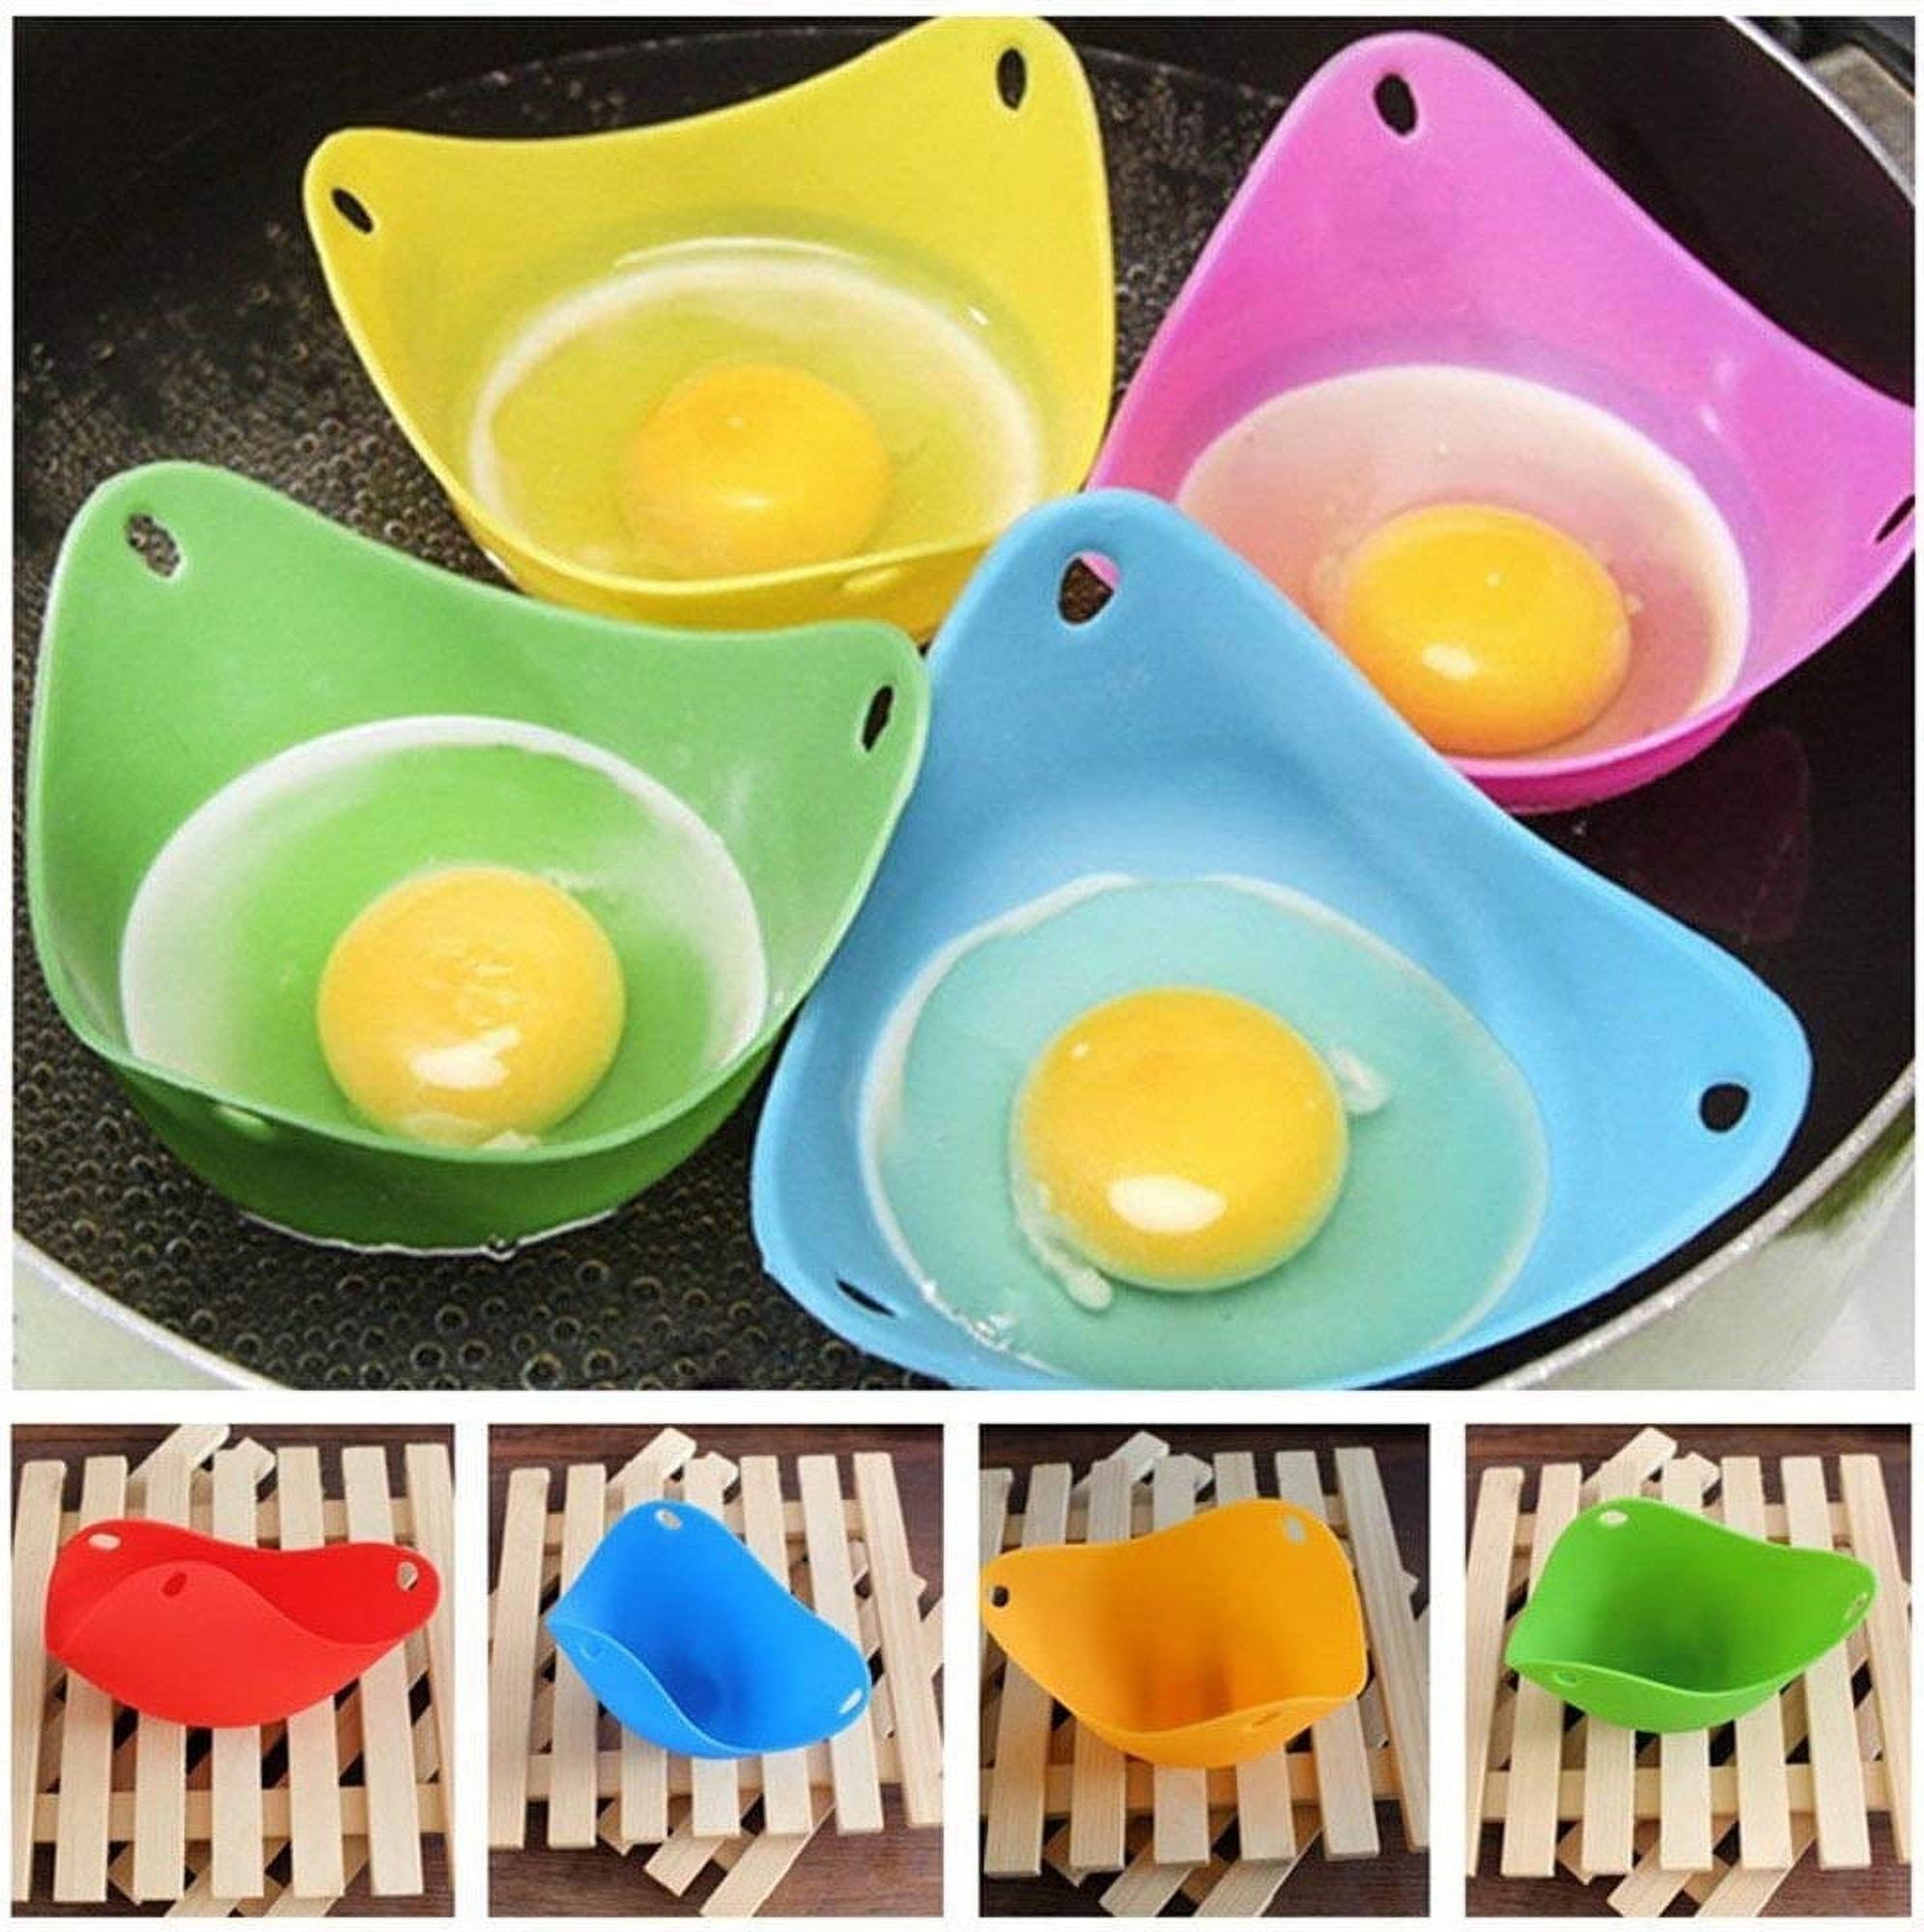 Egg Poacher Cup for Microwave or Stovetop Non-Stick - Heat-Resistant Durable Food Grade Quality Silicone Poached Egg Cooker BPA Free Egg Poaching